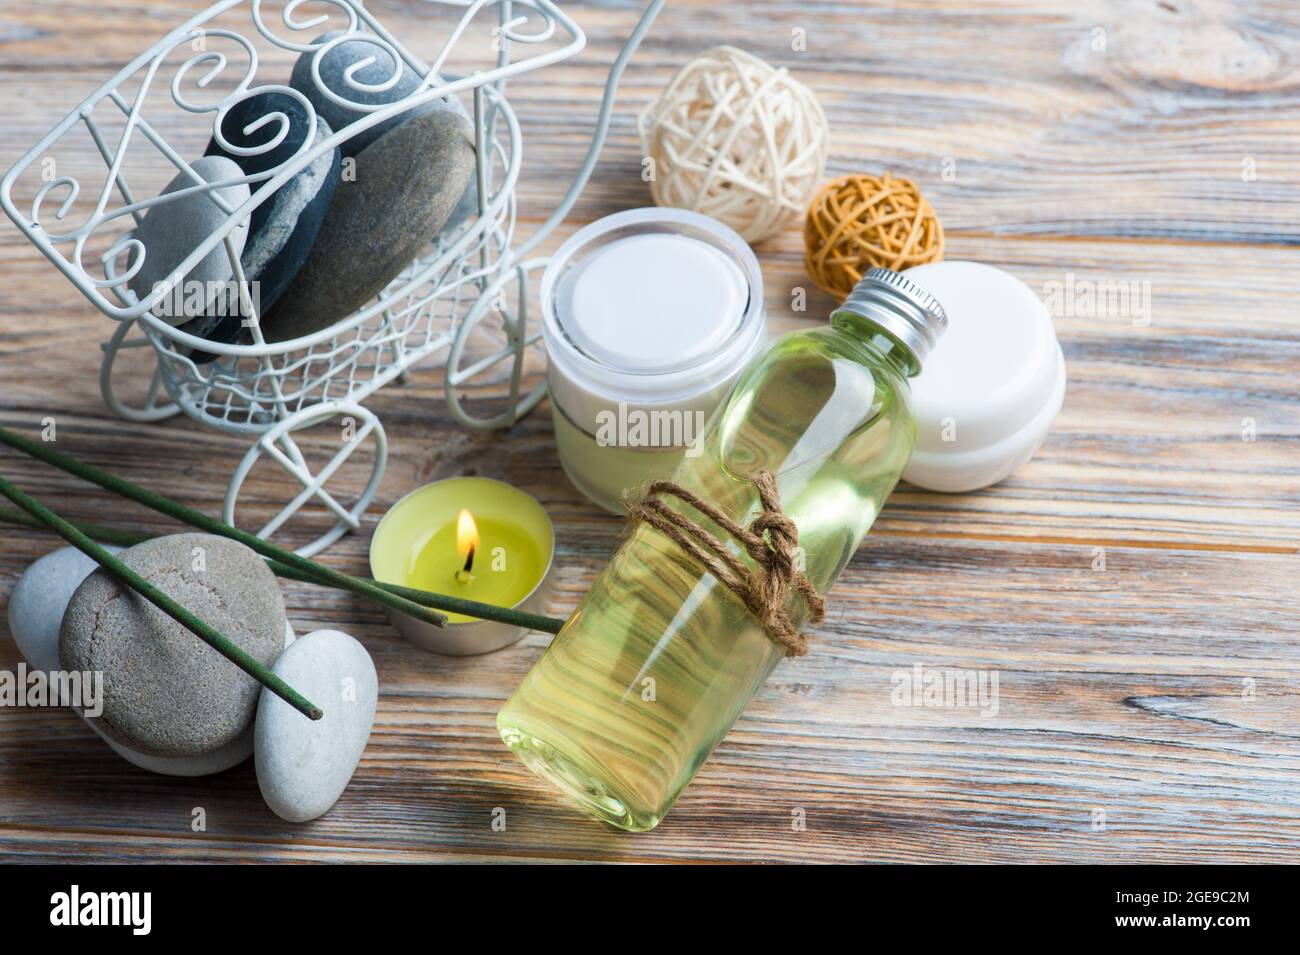 Aroma sticks, bueaty products, pebbles and lit candle in a SPA composition. Space for text Stock Photo